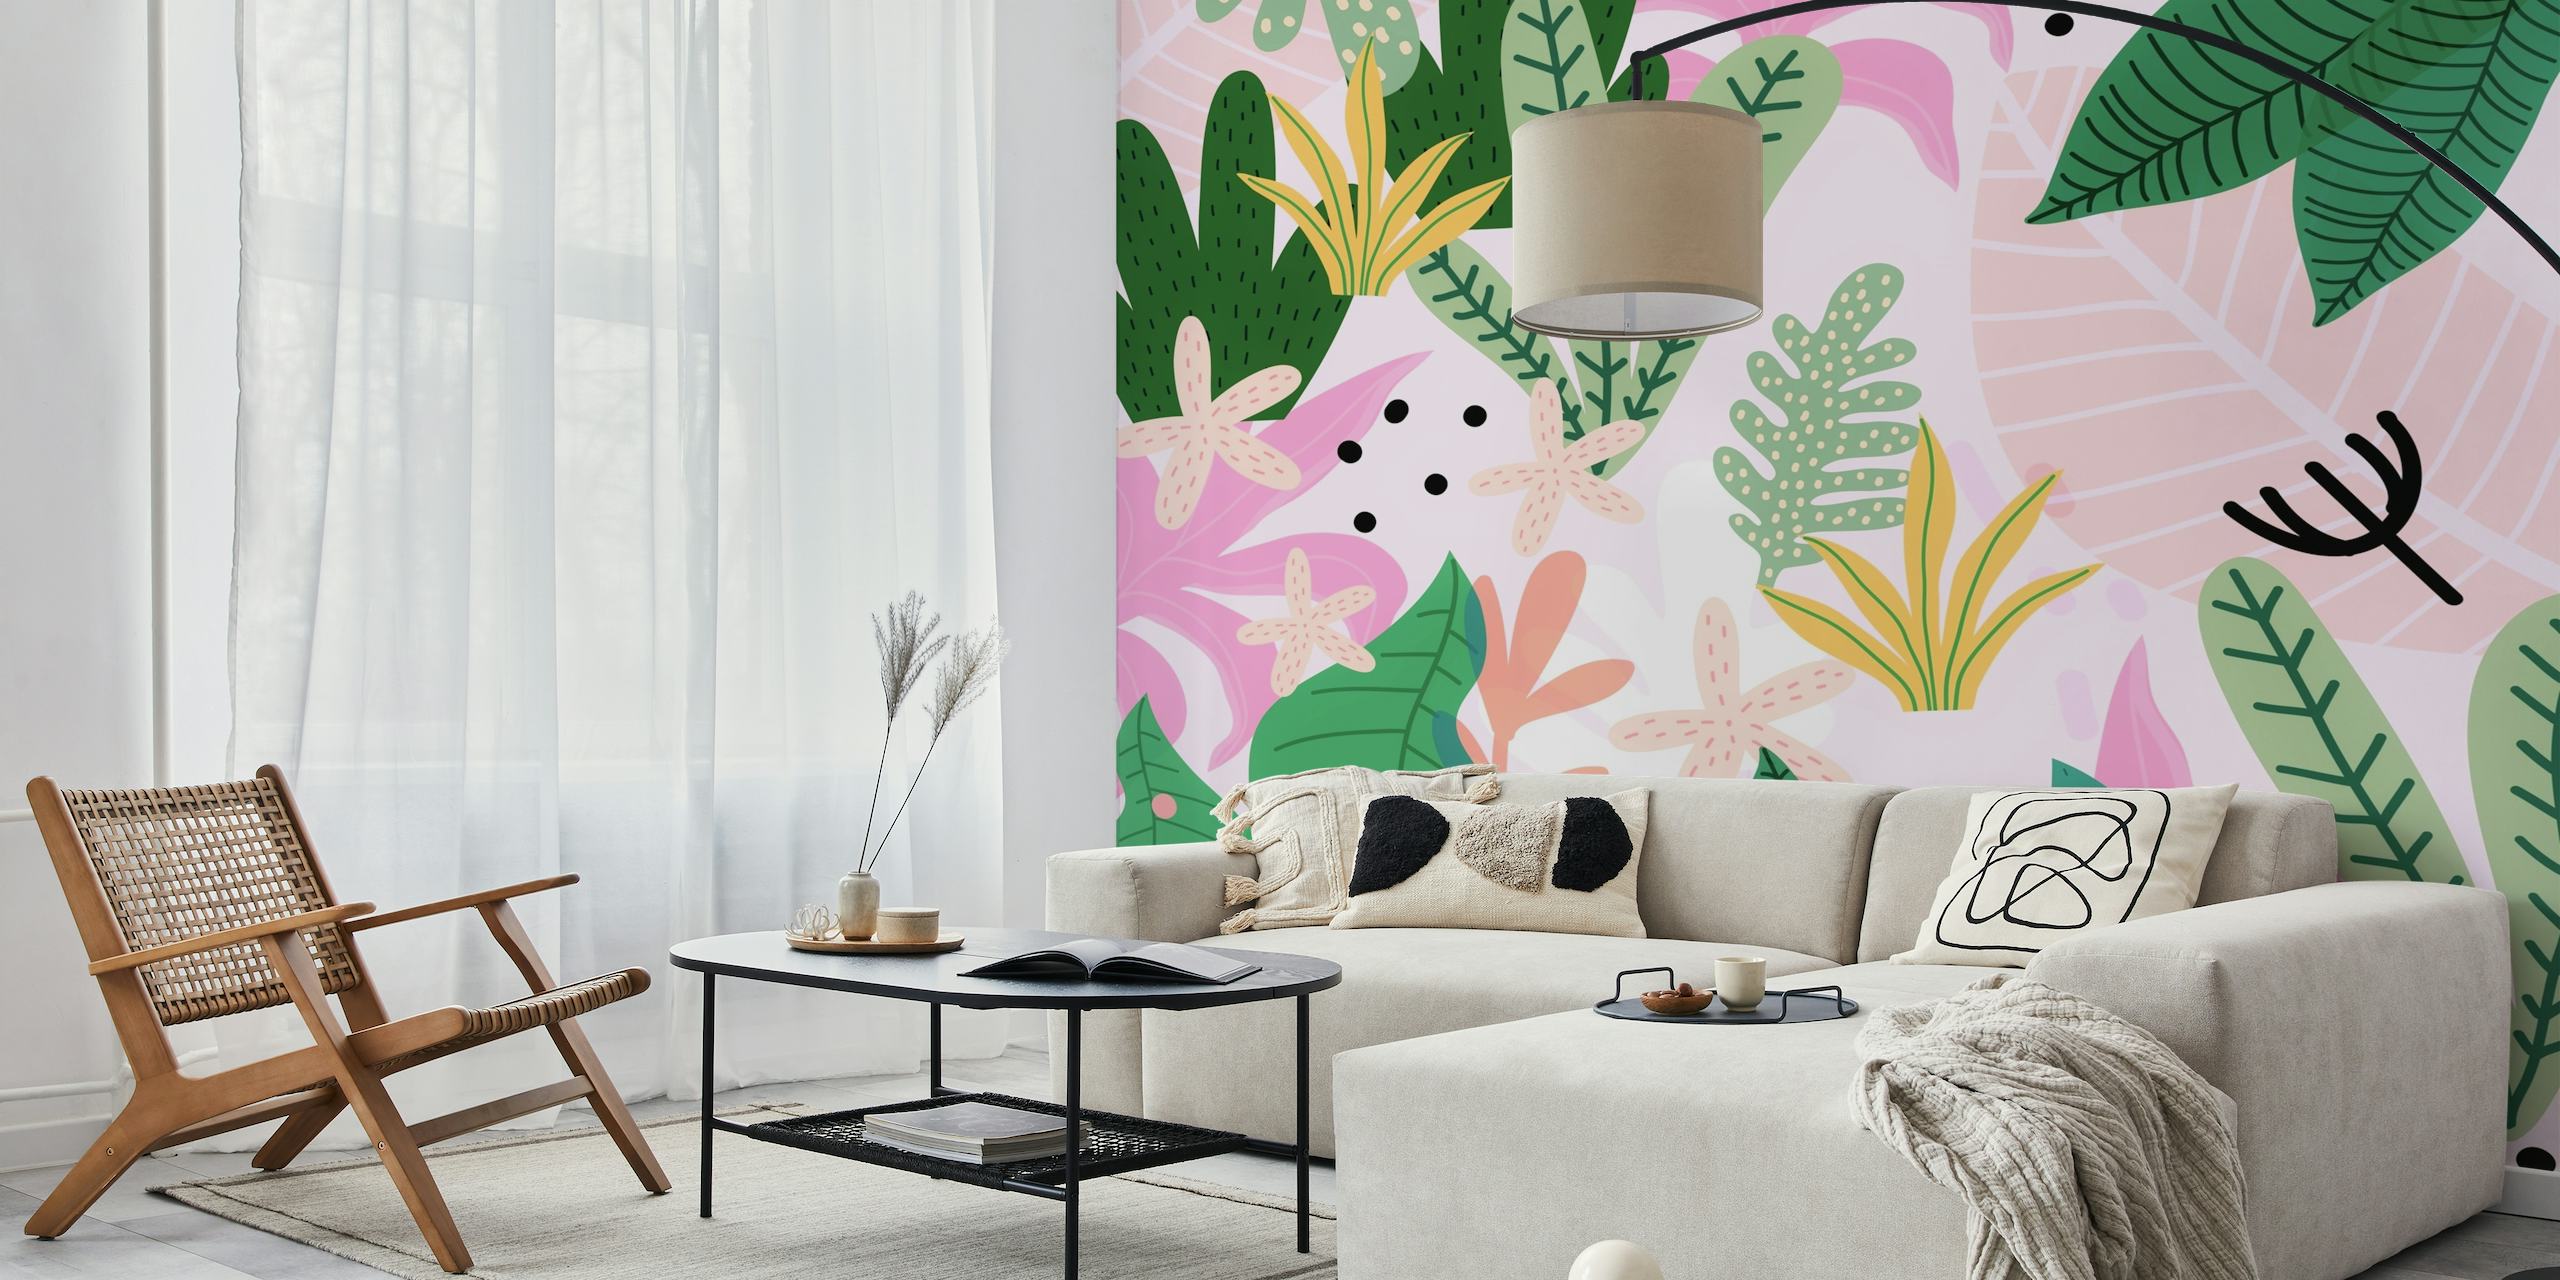 Illustrative wall mural featuring a tropical jungle scene with green foliage and pink tones at sunrise